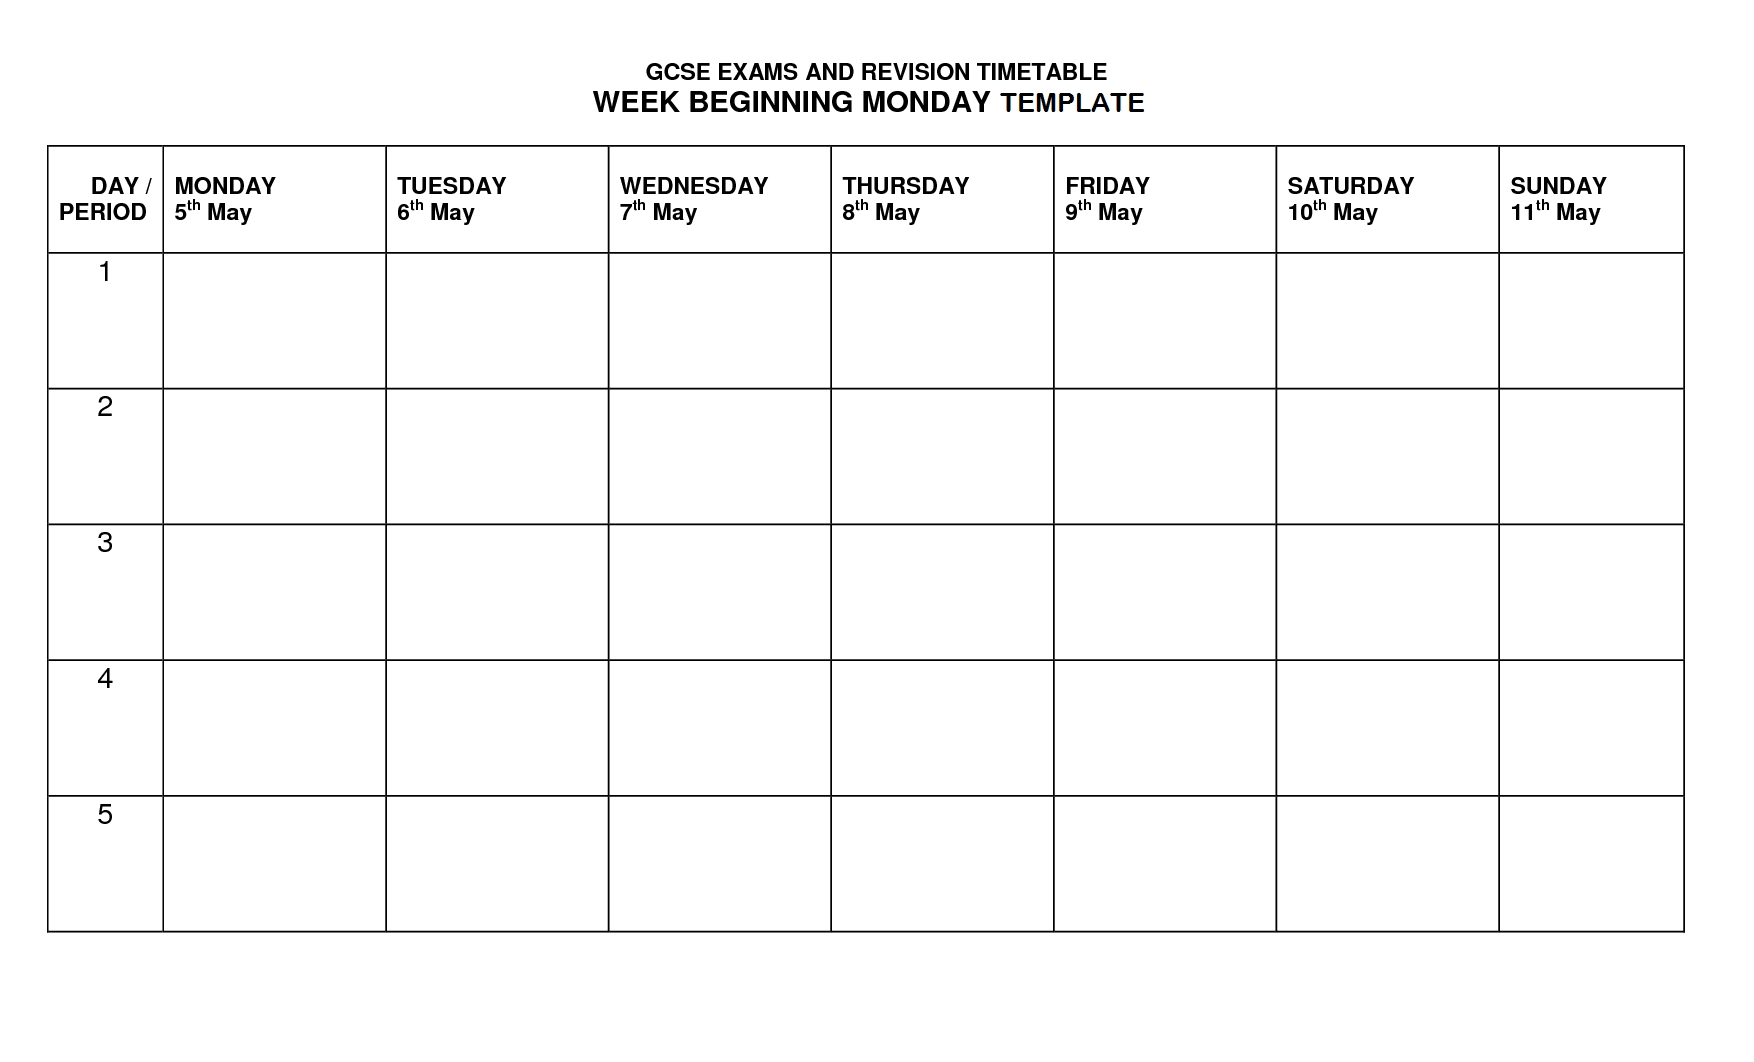 Timetable Template | Timetable Templates | Timetable-Monday - Friday Timetable Template